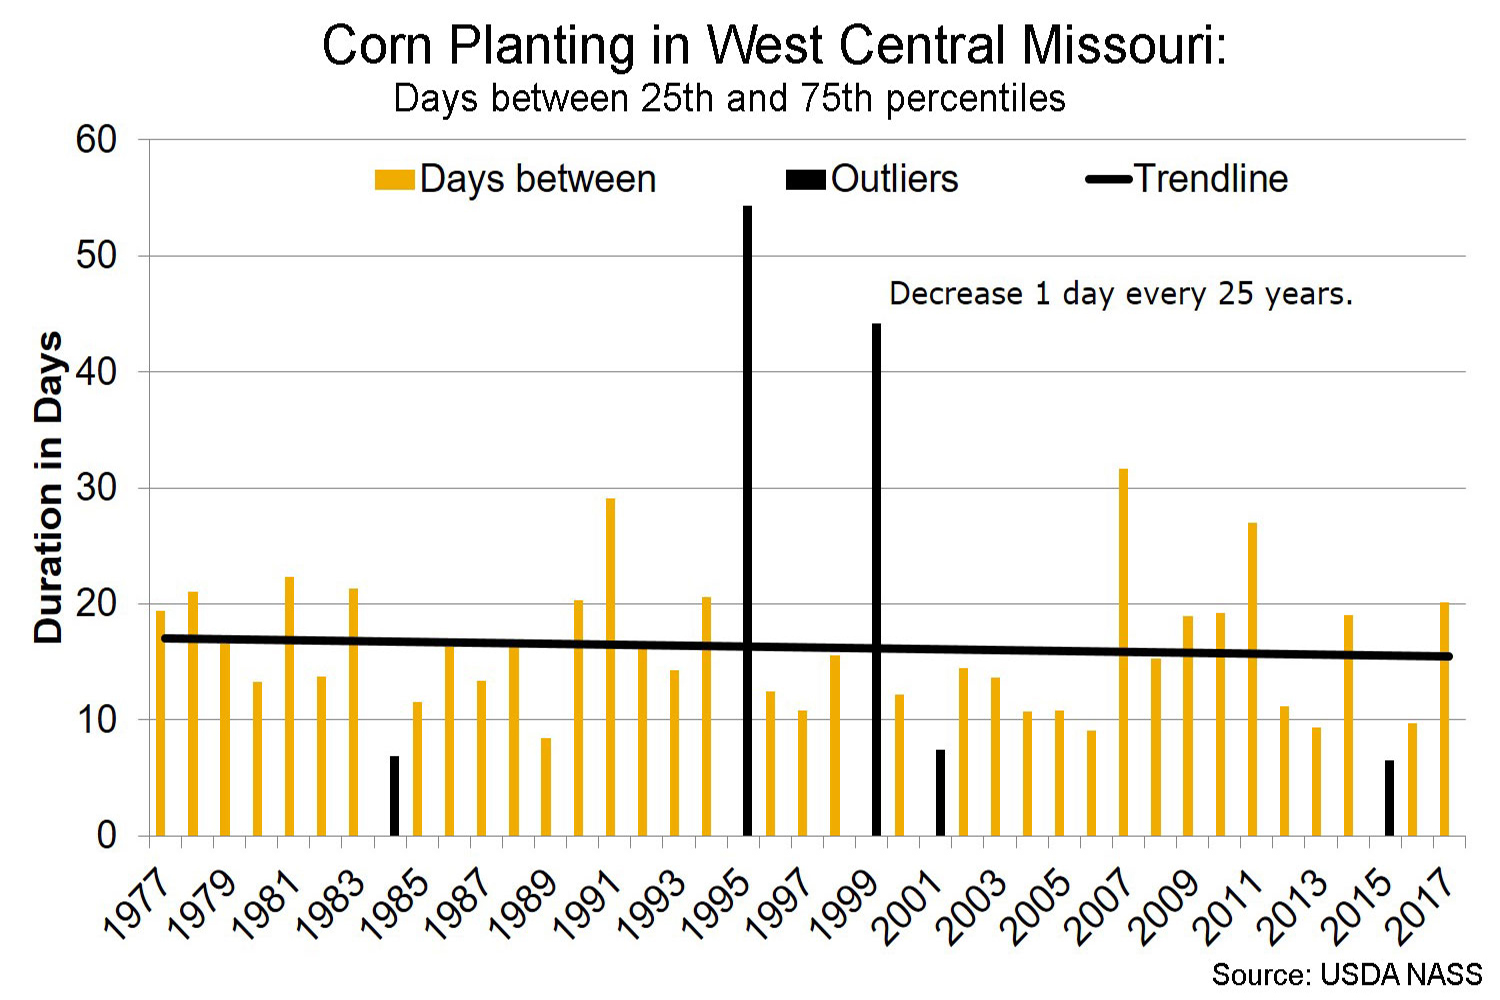 Corn planting in west central Missouri days between 25th and 75th percentiles chart